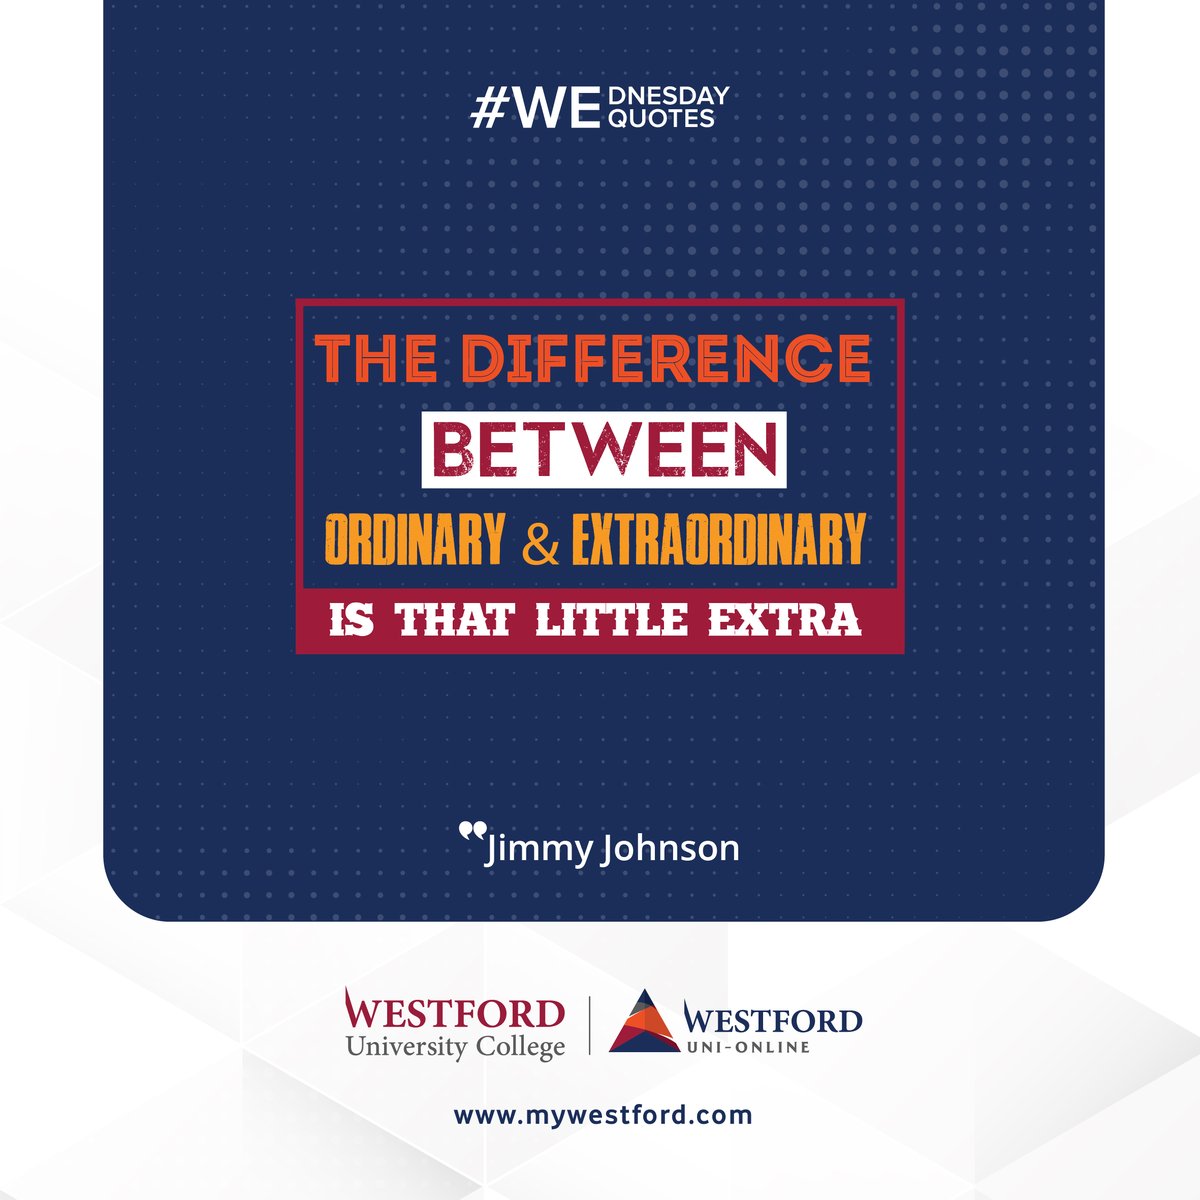 In a world where the ordinary often takes centre stage, let's celebrate the power of that little extra that transforms the ordinary into the extraordinary.
#Wednesdayquote #WeQuote #Westforduniversitycollege #Wearewestford #Lifeatwestford #westfordbusinessschoolonline